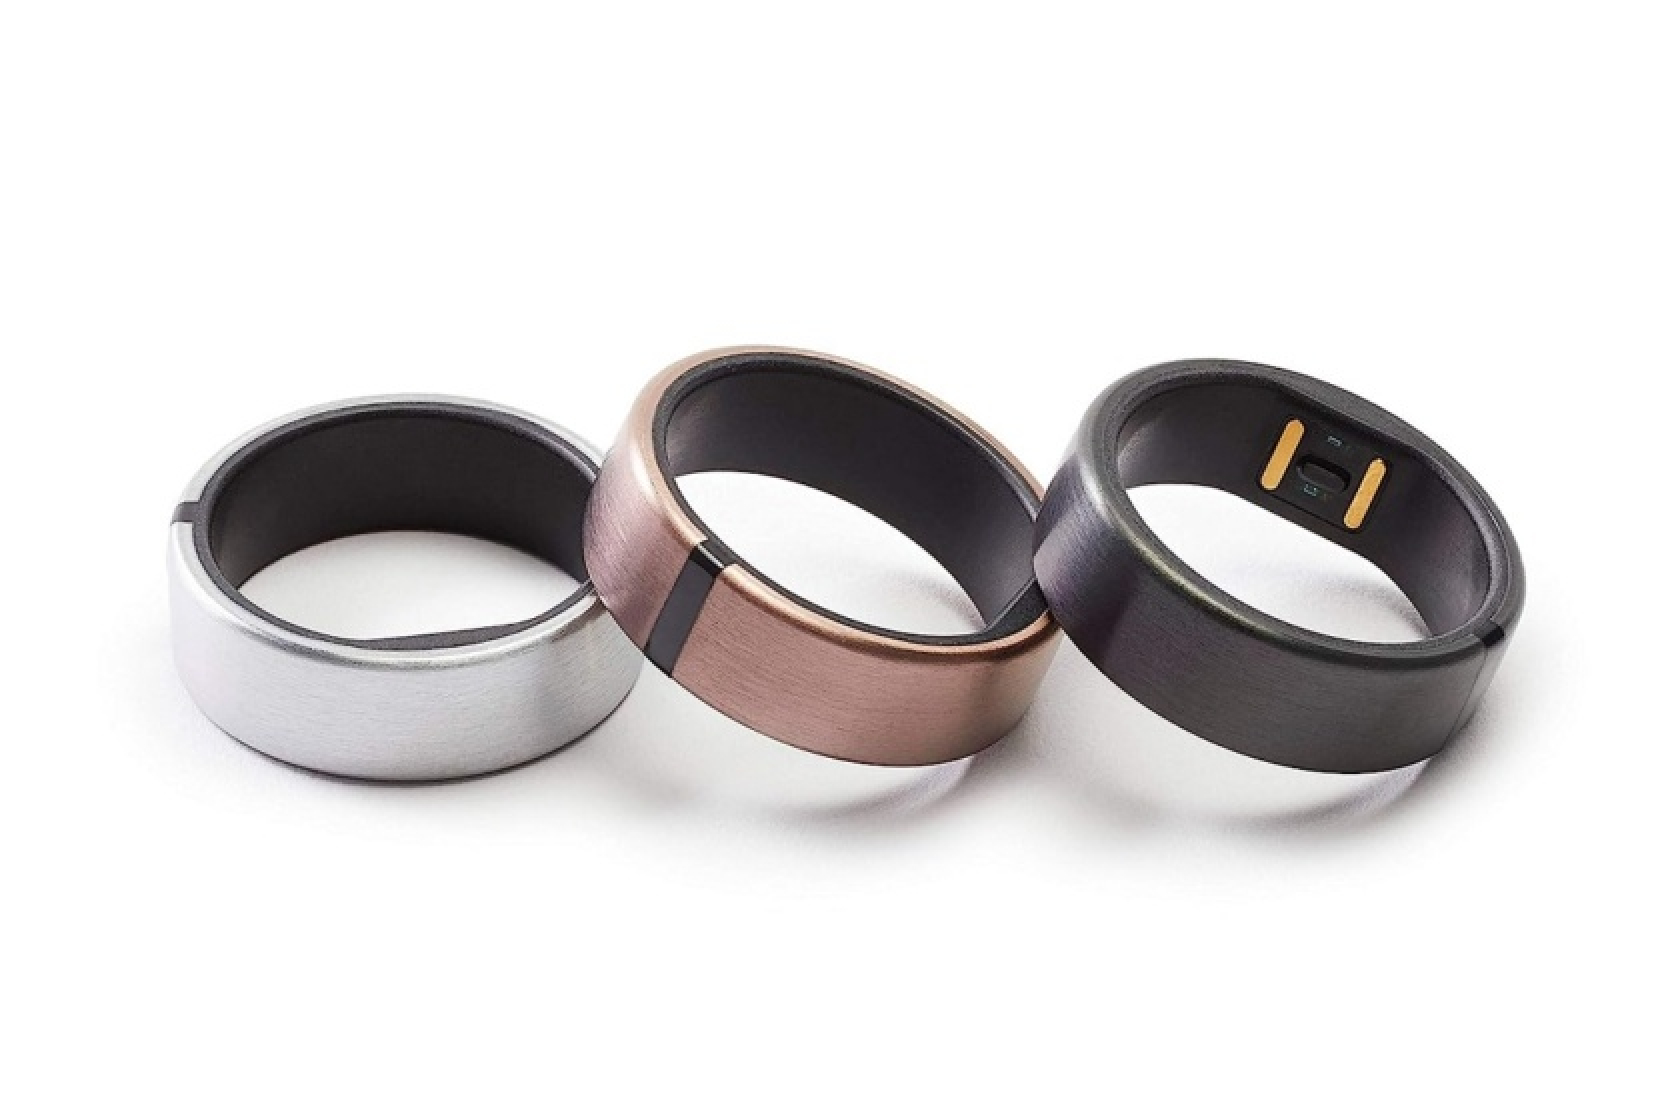 The Galaxy Ring smart ring will be available in 8 sizes, will be able to work for up to 9 days and will get a Lost Mode for searching